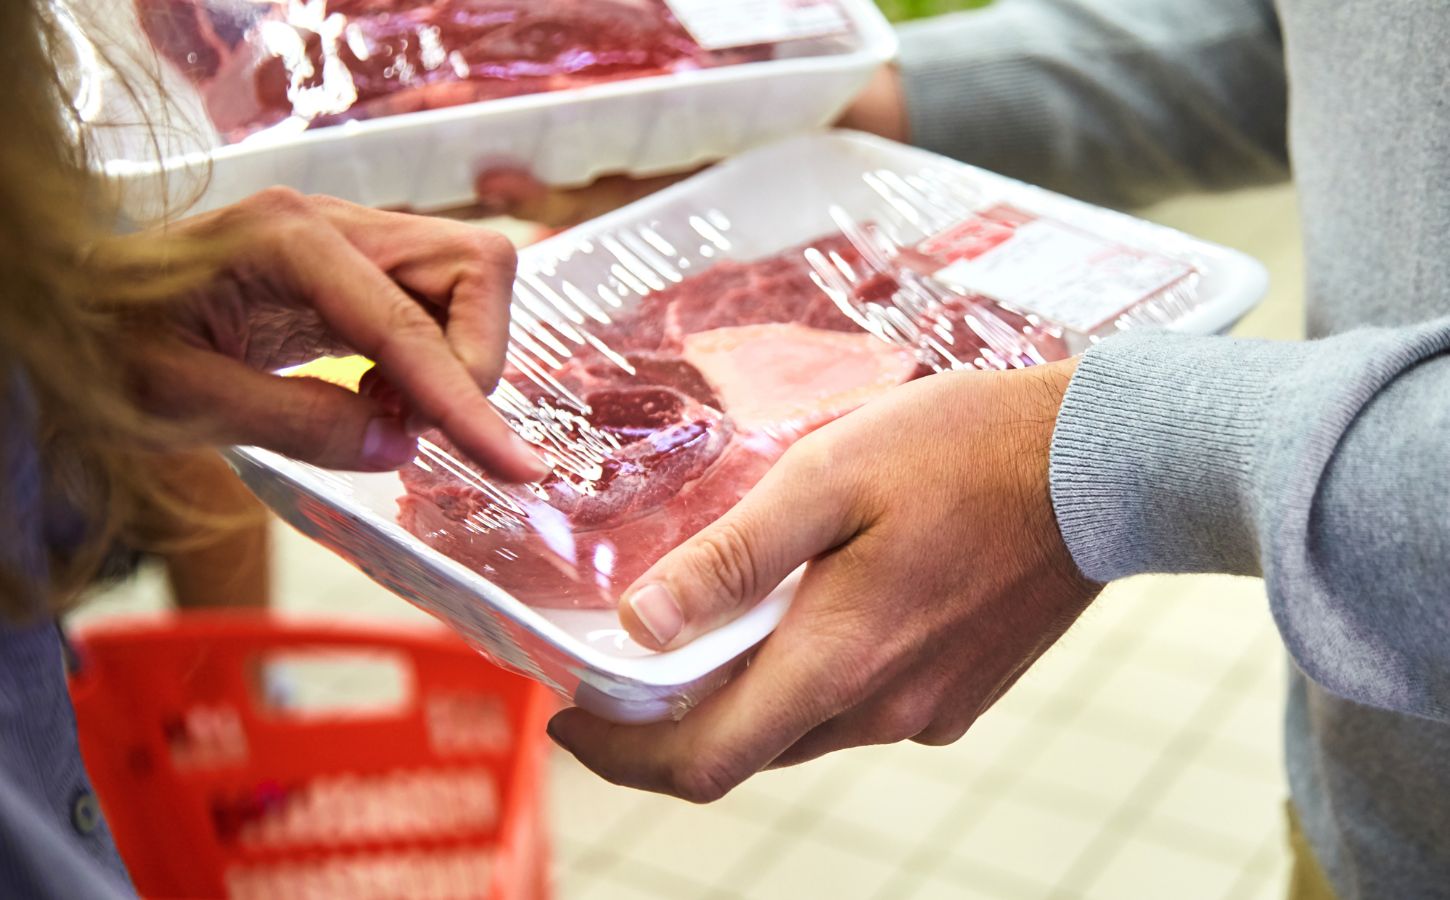 A person holds beef meat in a white plastic tray in a supermarket